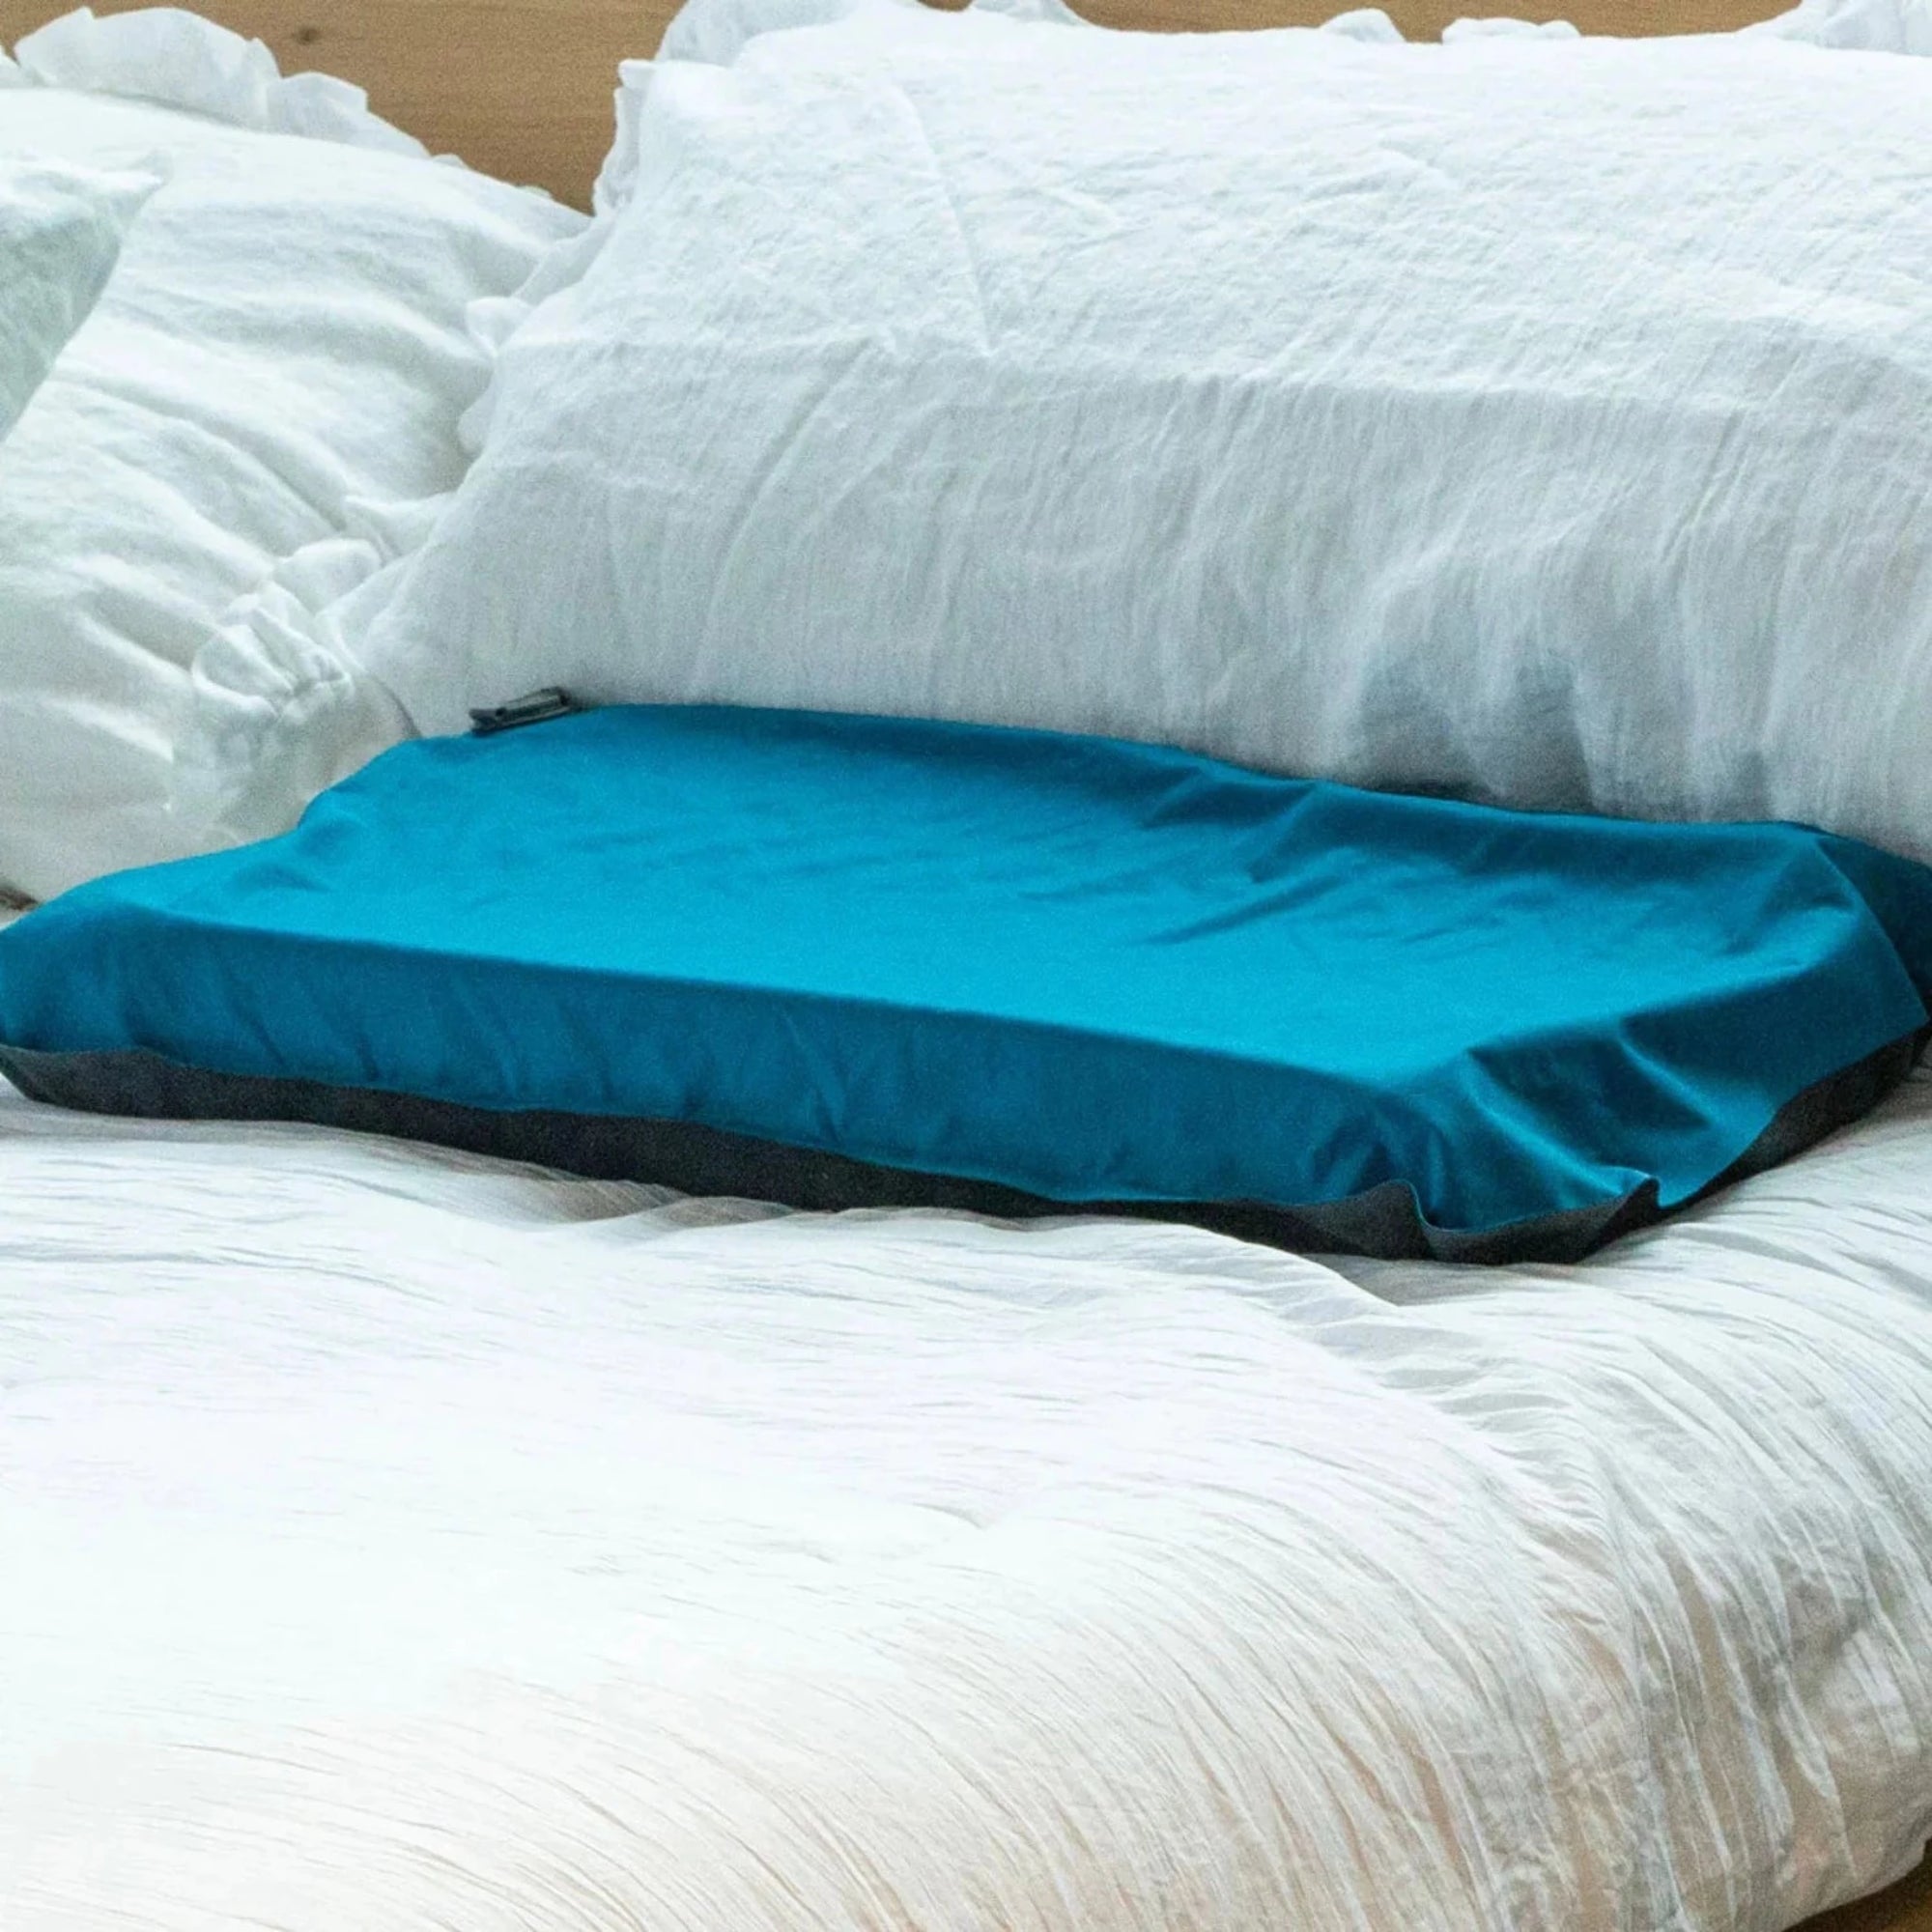 ColdBed Pillow - The Coldest Pillow On Earth